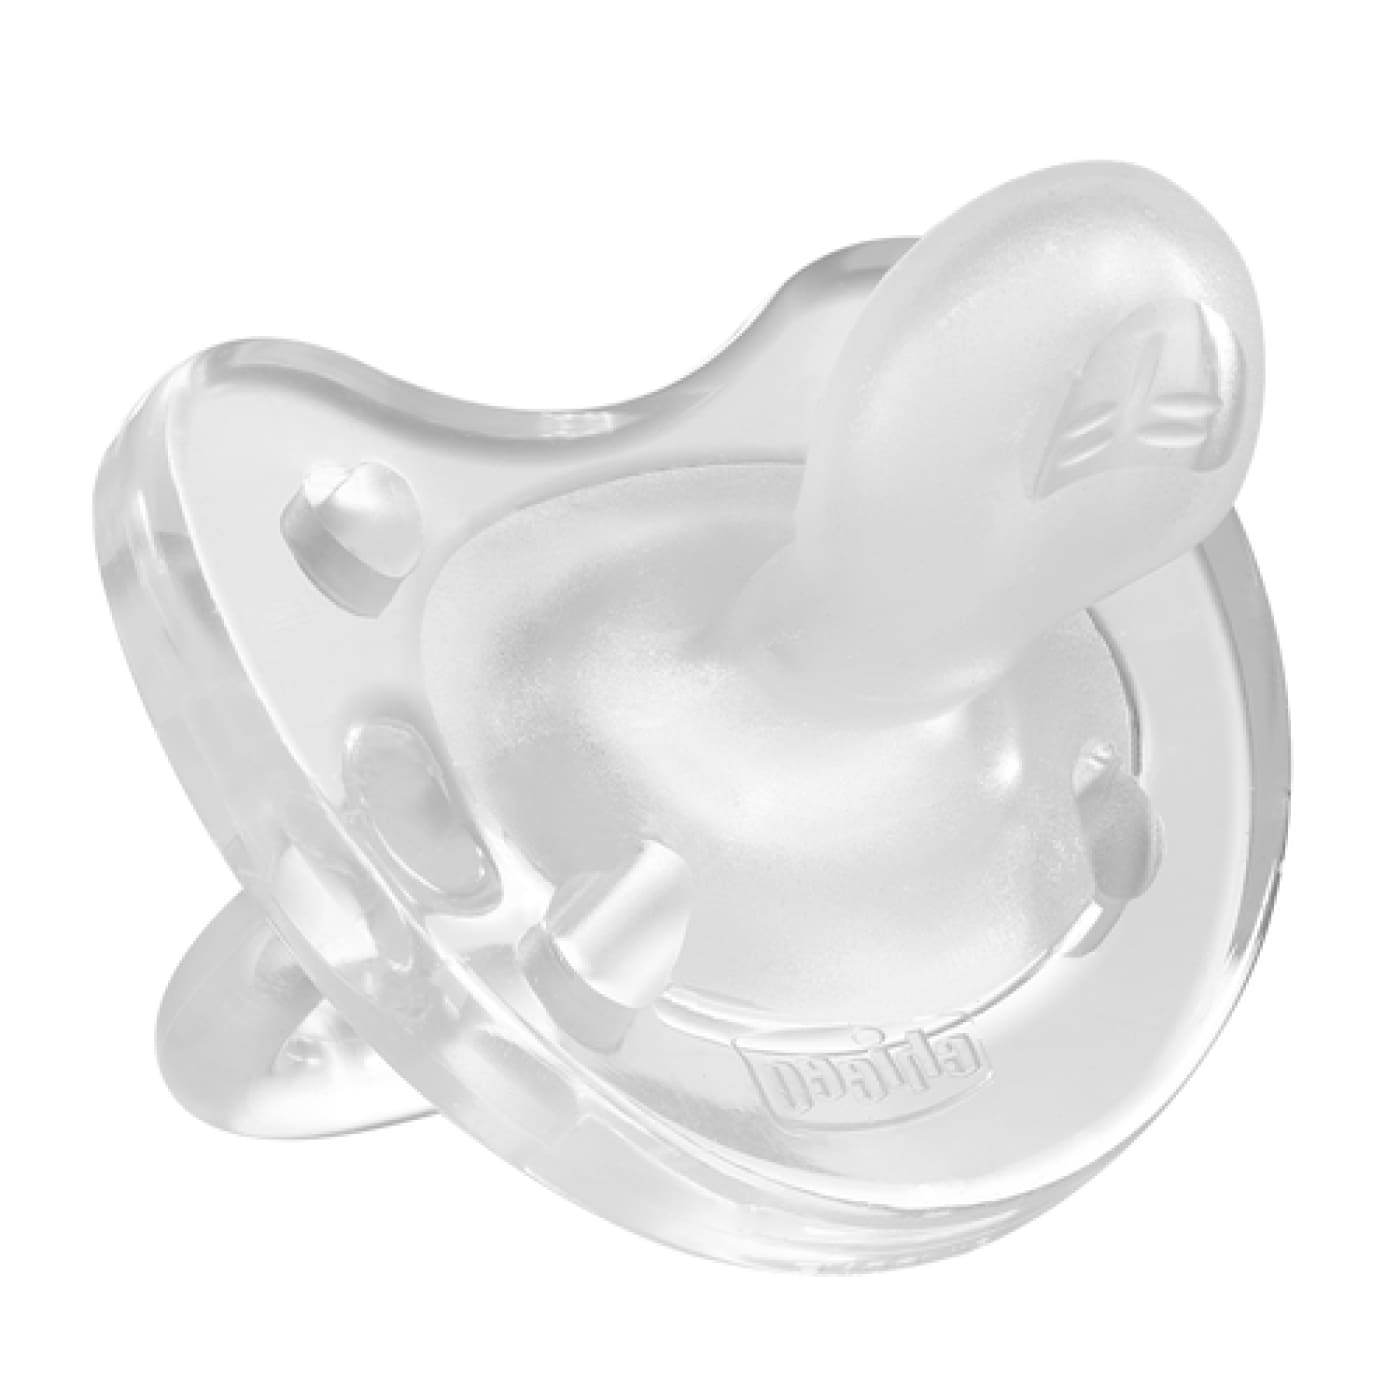 Chicco Physio Soft Soother 0-6M 2pk - Girl - NURSING & FEEDING - DUMMIES/SOOTHERS/CLIPS